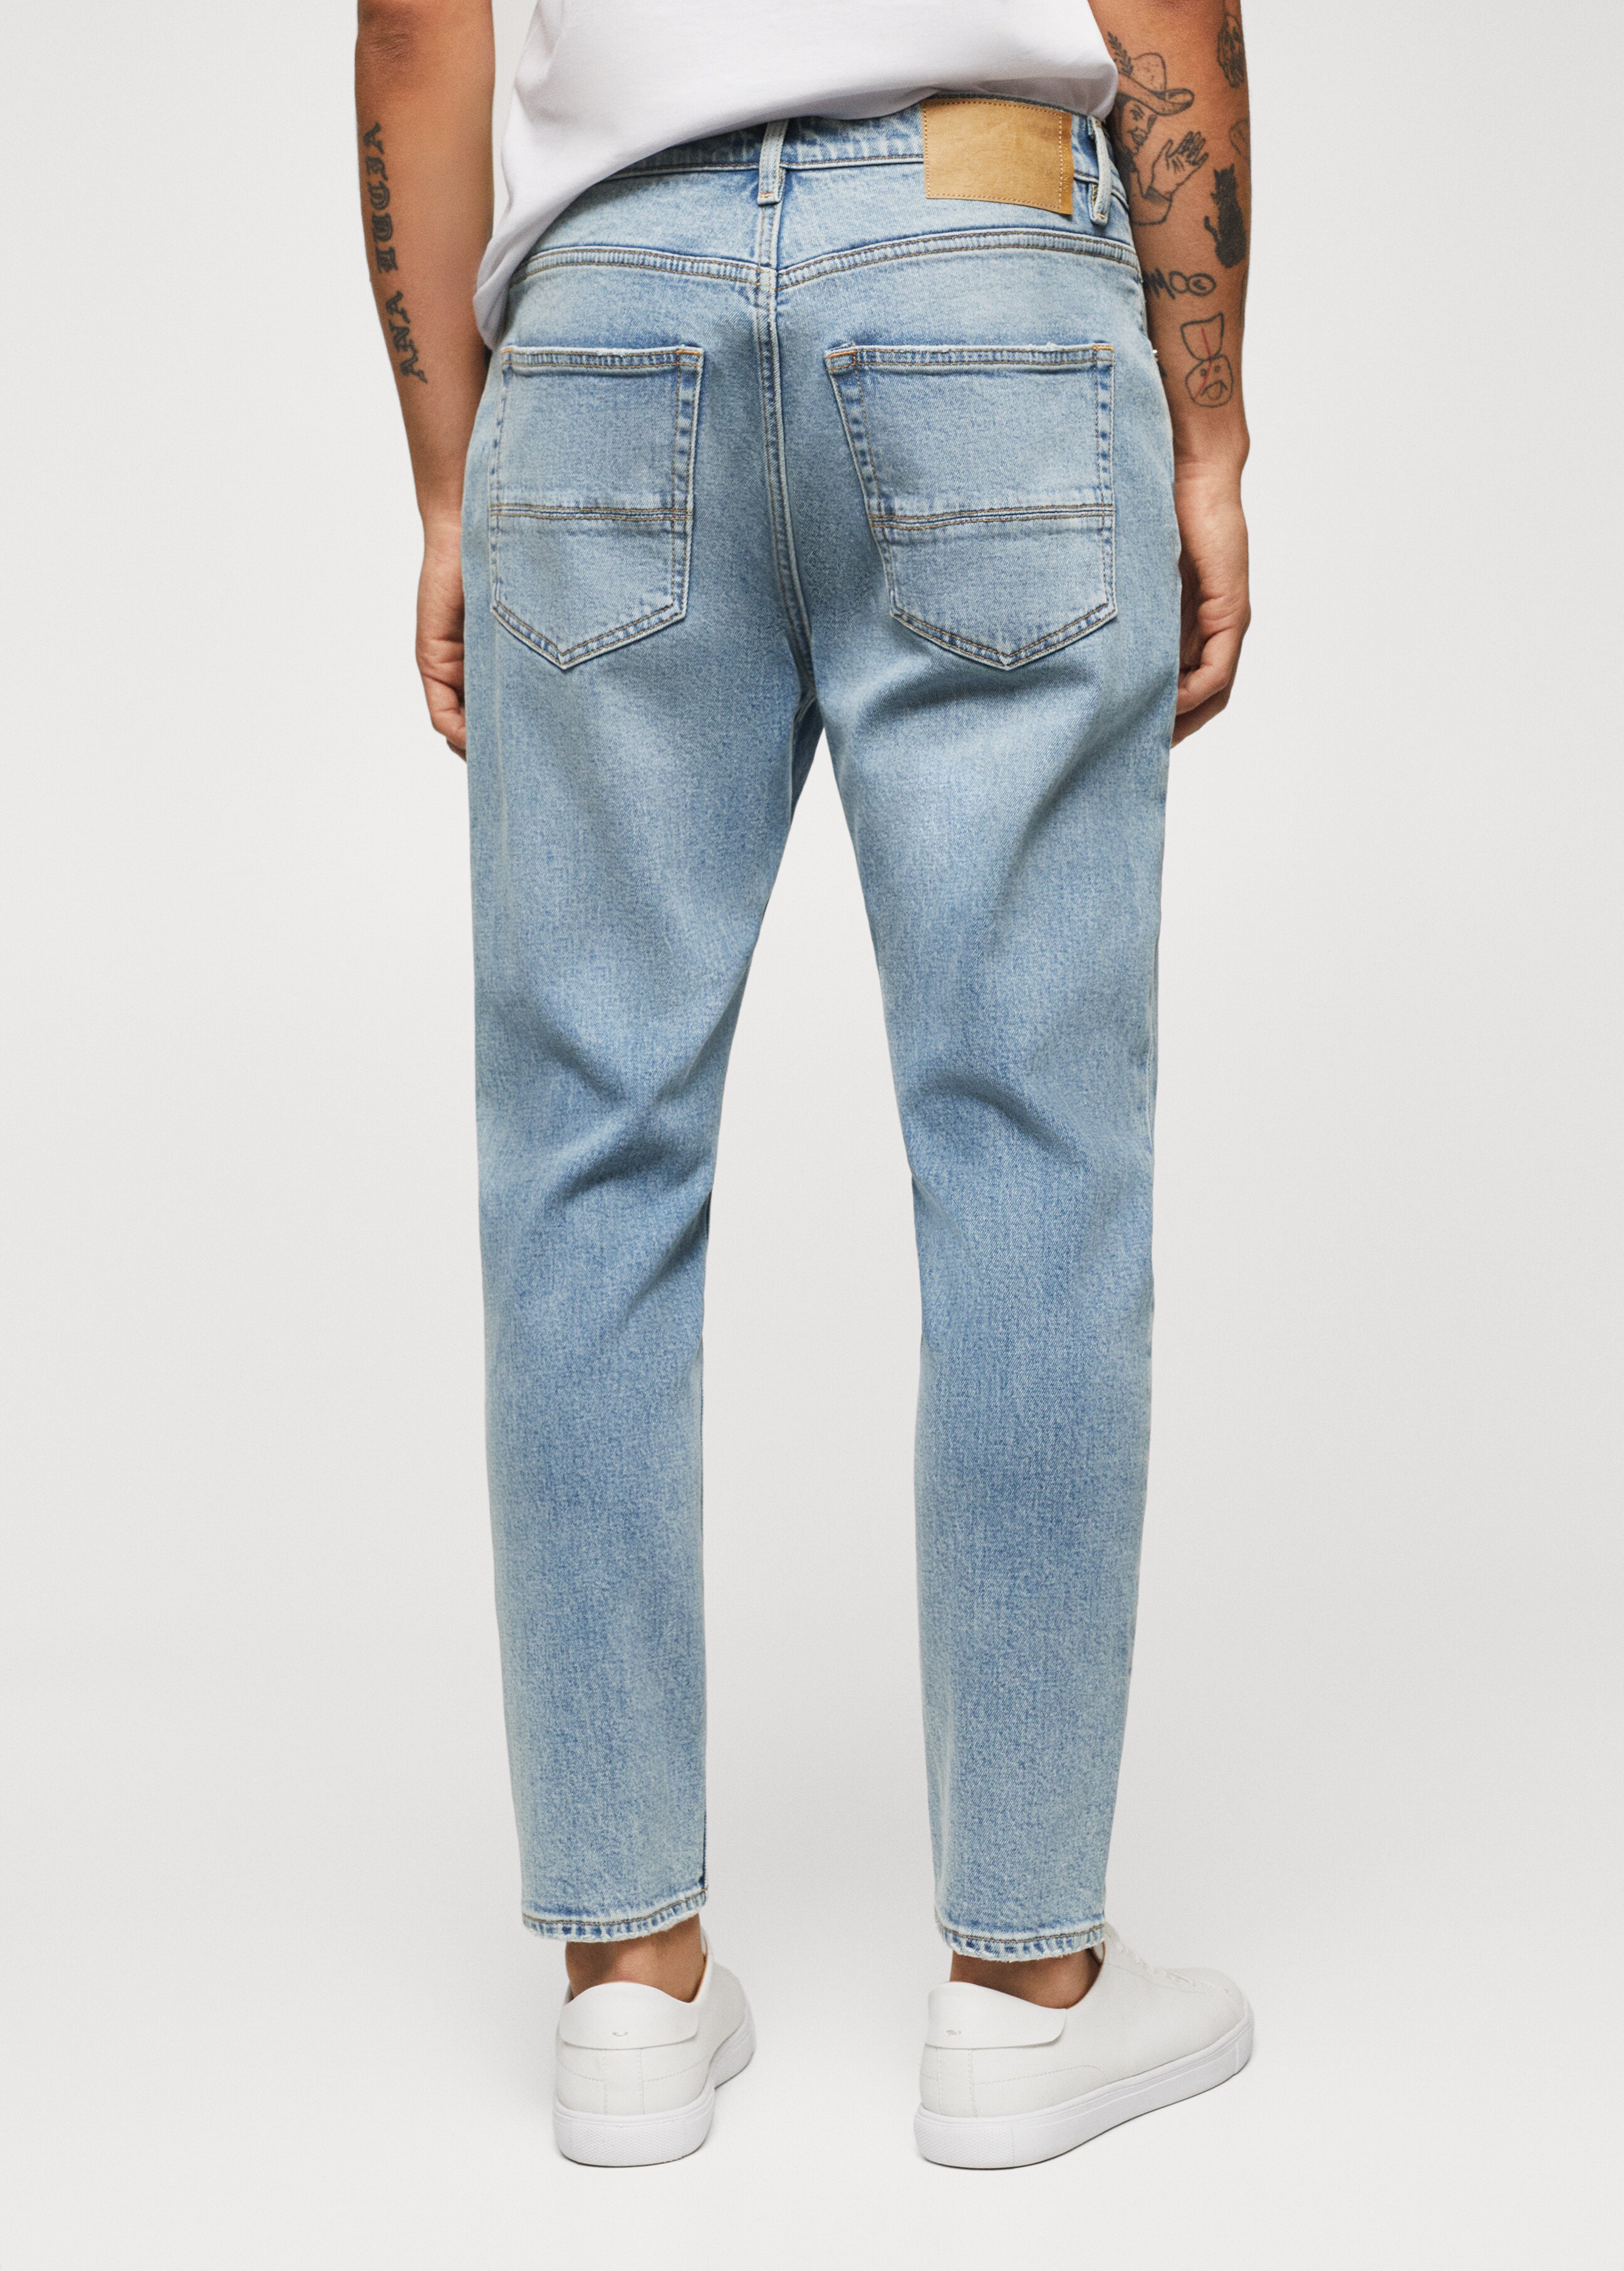 Jean Tom tapered-fit - Verso de l’article